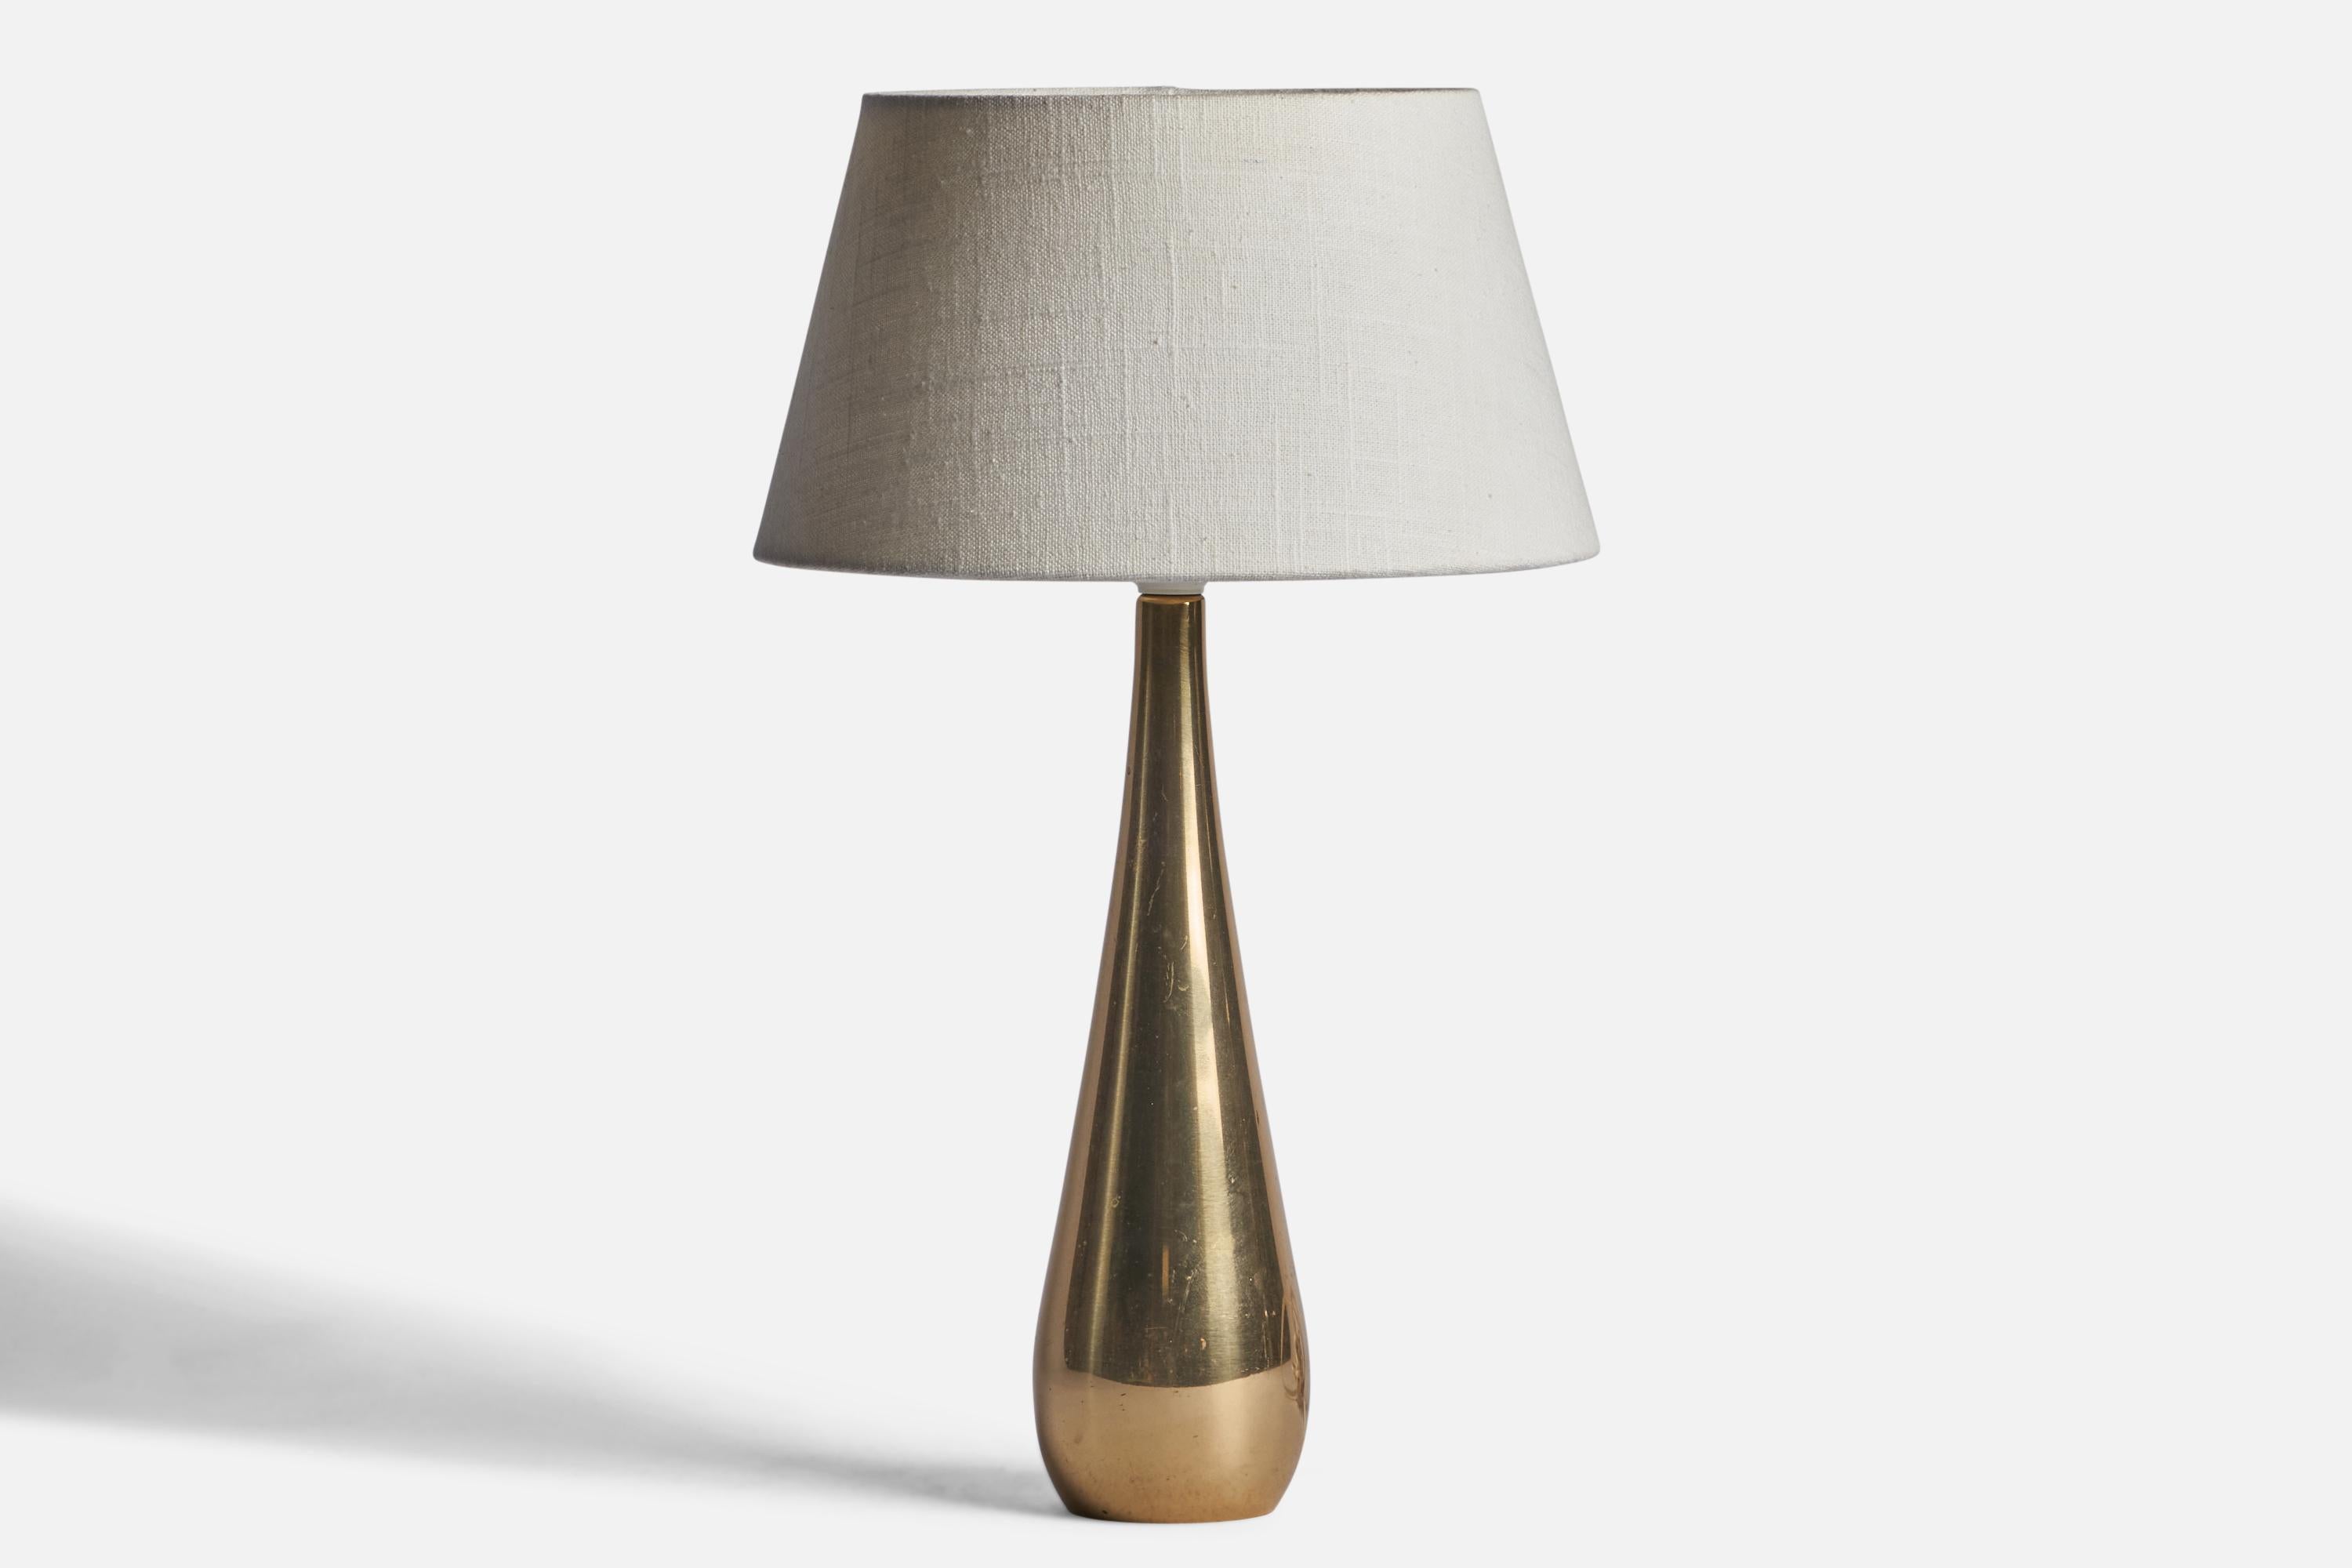 A brass table lamp designed by Mauri Almari and produced by Idman, Finland, 1950s.

Dimensions of Lamp (inches): 14.05” H x 3.3” Diameter
Dimensions of Shade (inches): 7” Top Diameter x 10” Bottom Diameter x 5.5” H 
Dimensions of Lamp with Shade